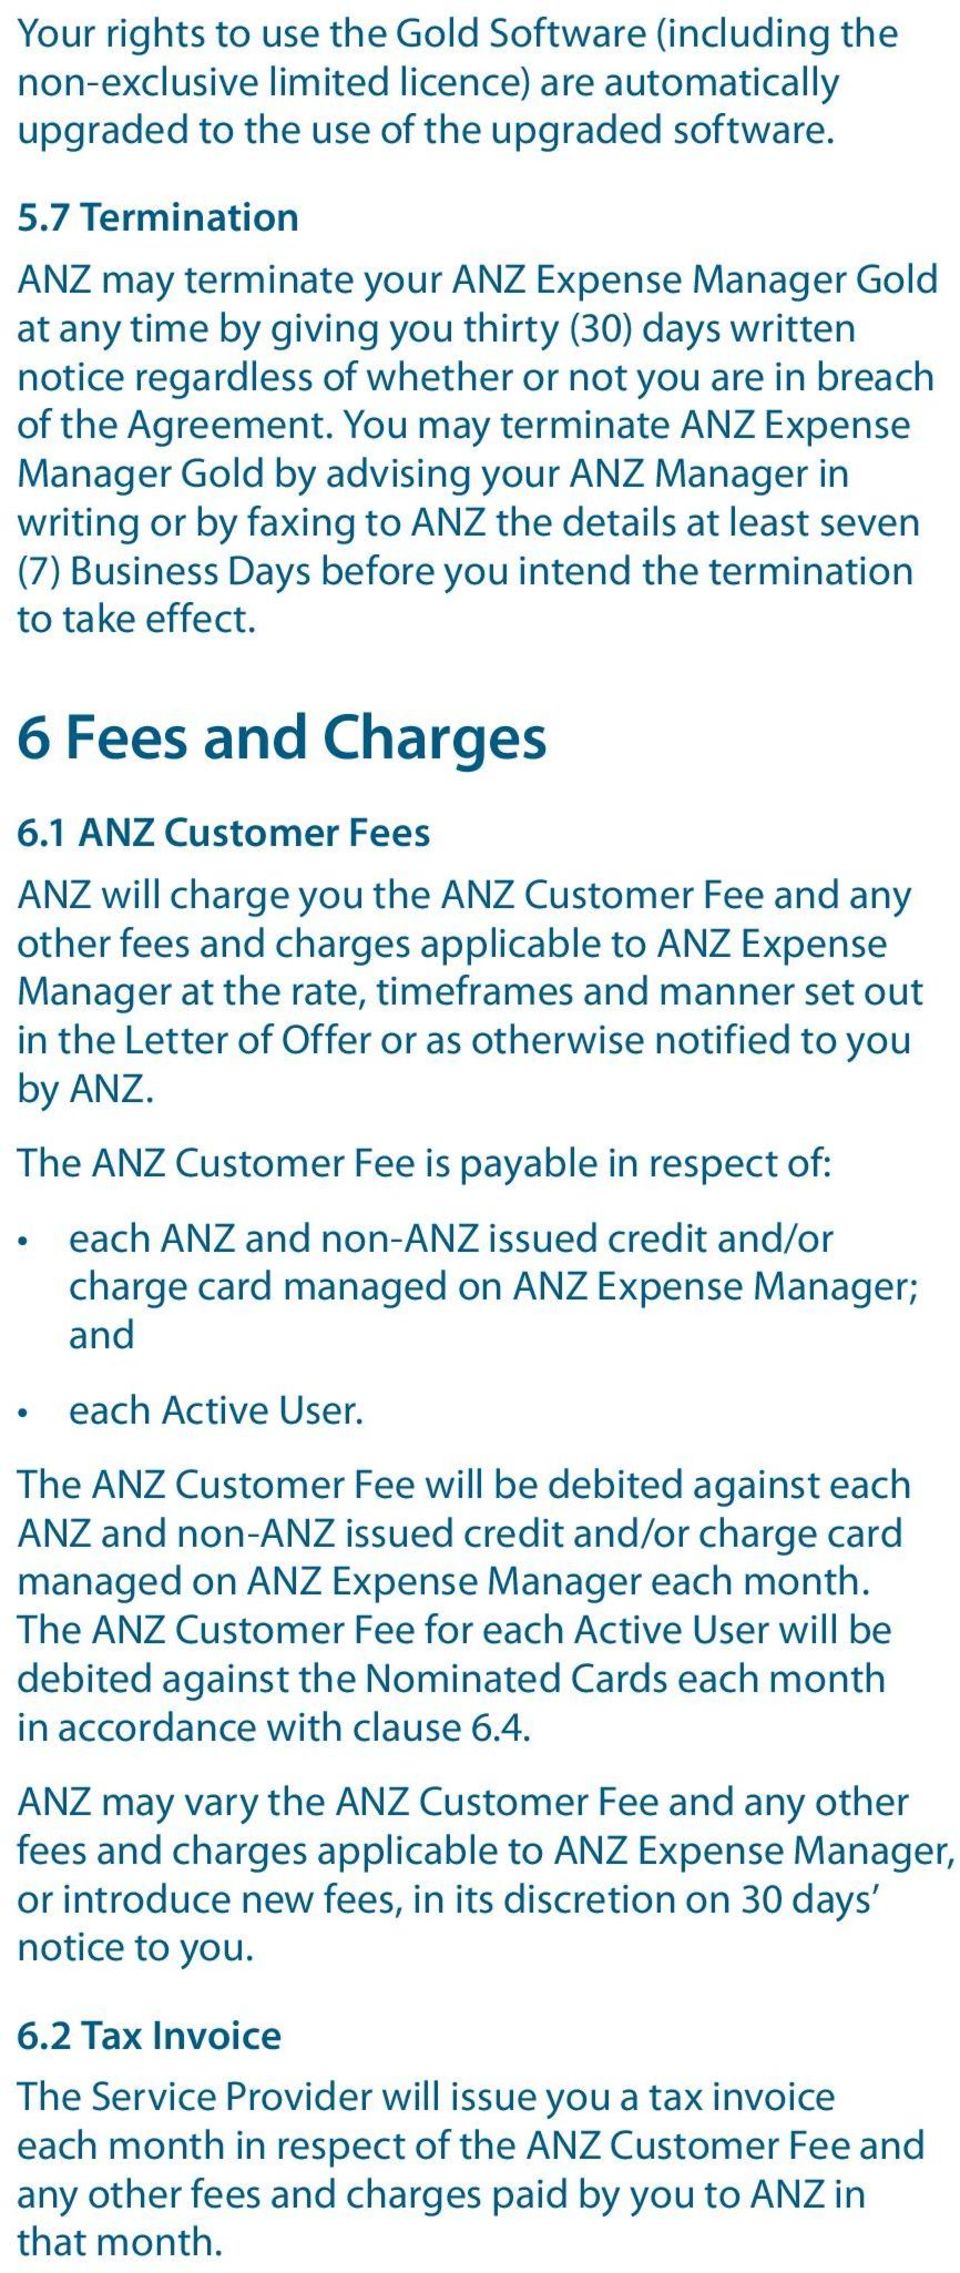 You may terminate ANZ Expense Manager Gold by advising your ANZ Manager in writing or by faxing to ANZ the details at least seven (7) Business Days before you intend the termination to take effect.